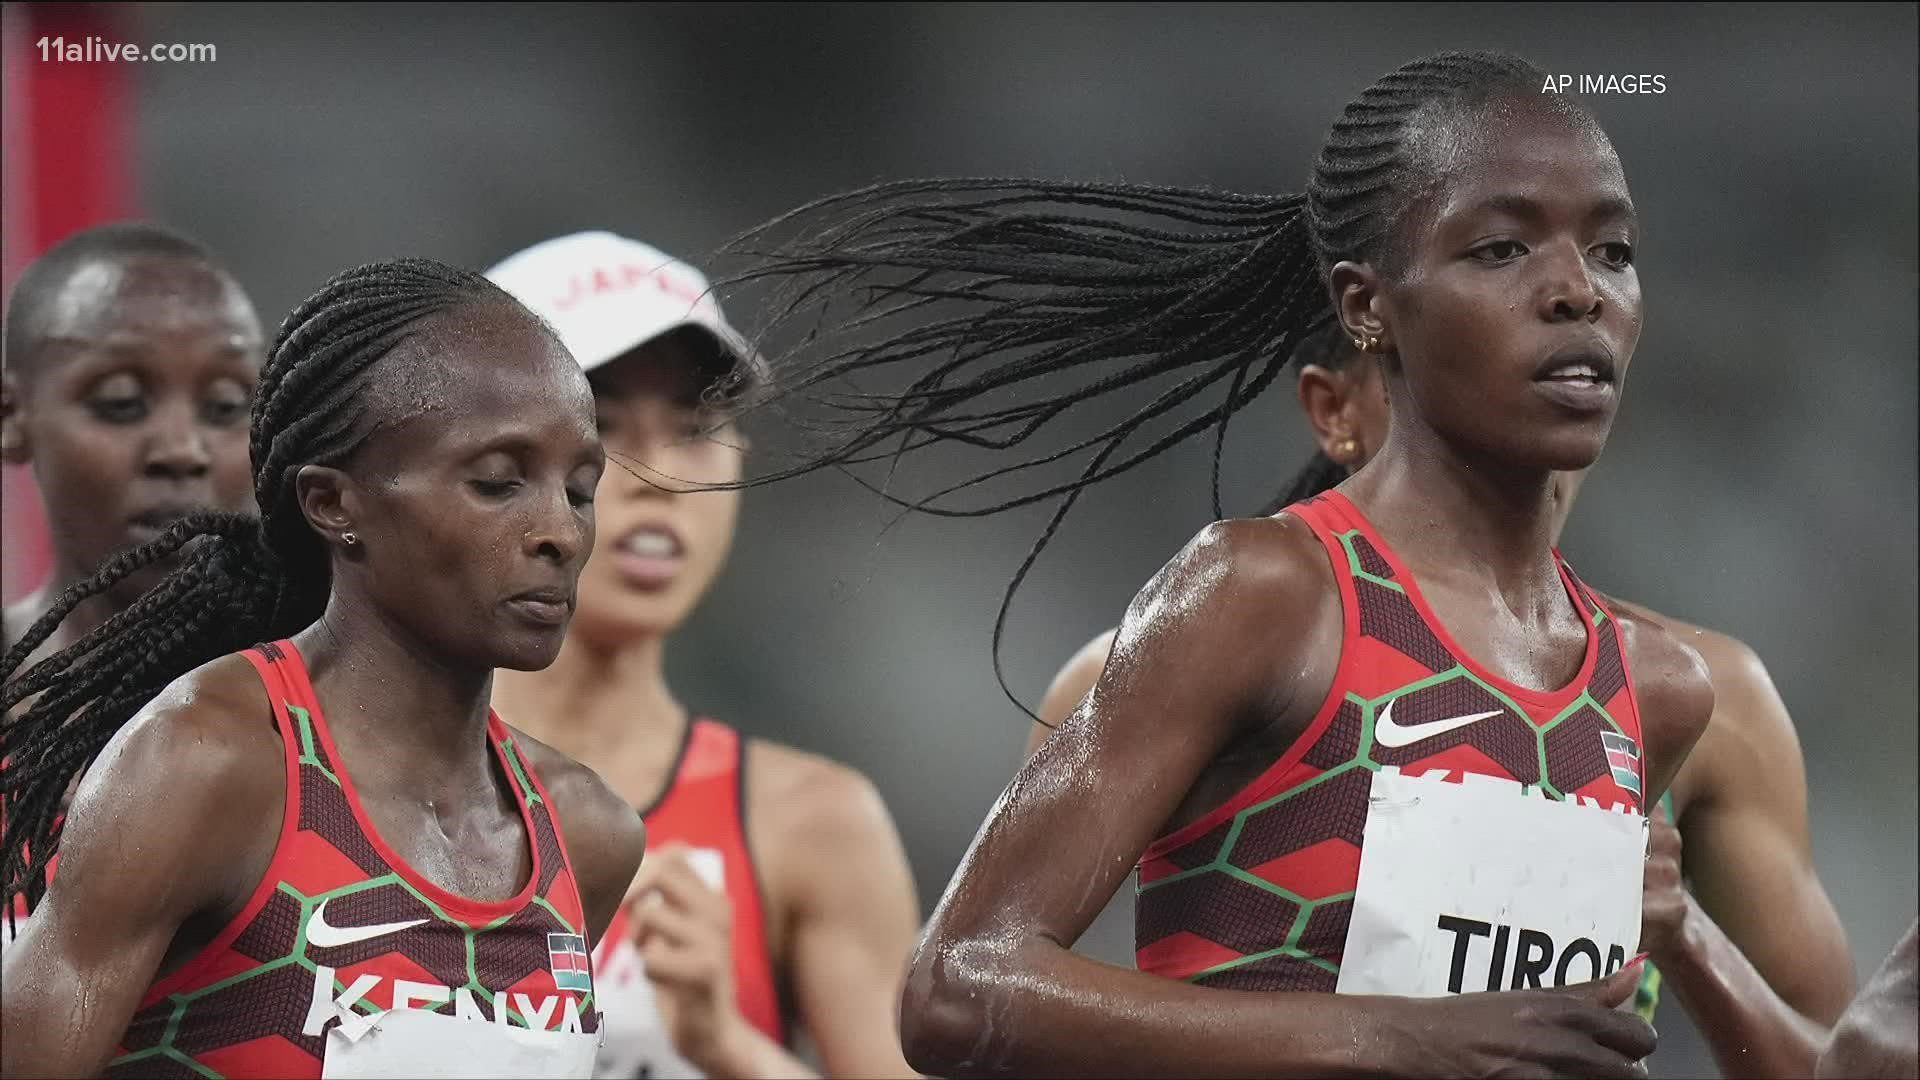 Kenyan long-distance runner Agnes Tirop was found stabbed to death in her home.